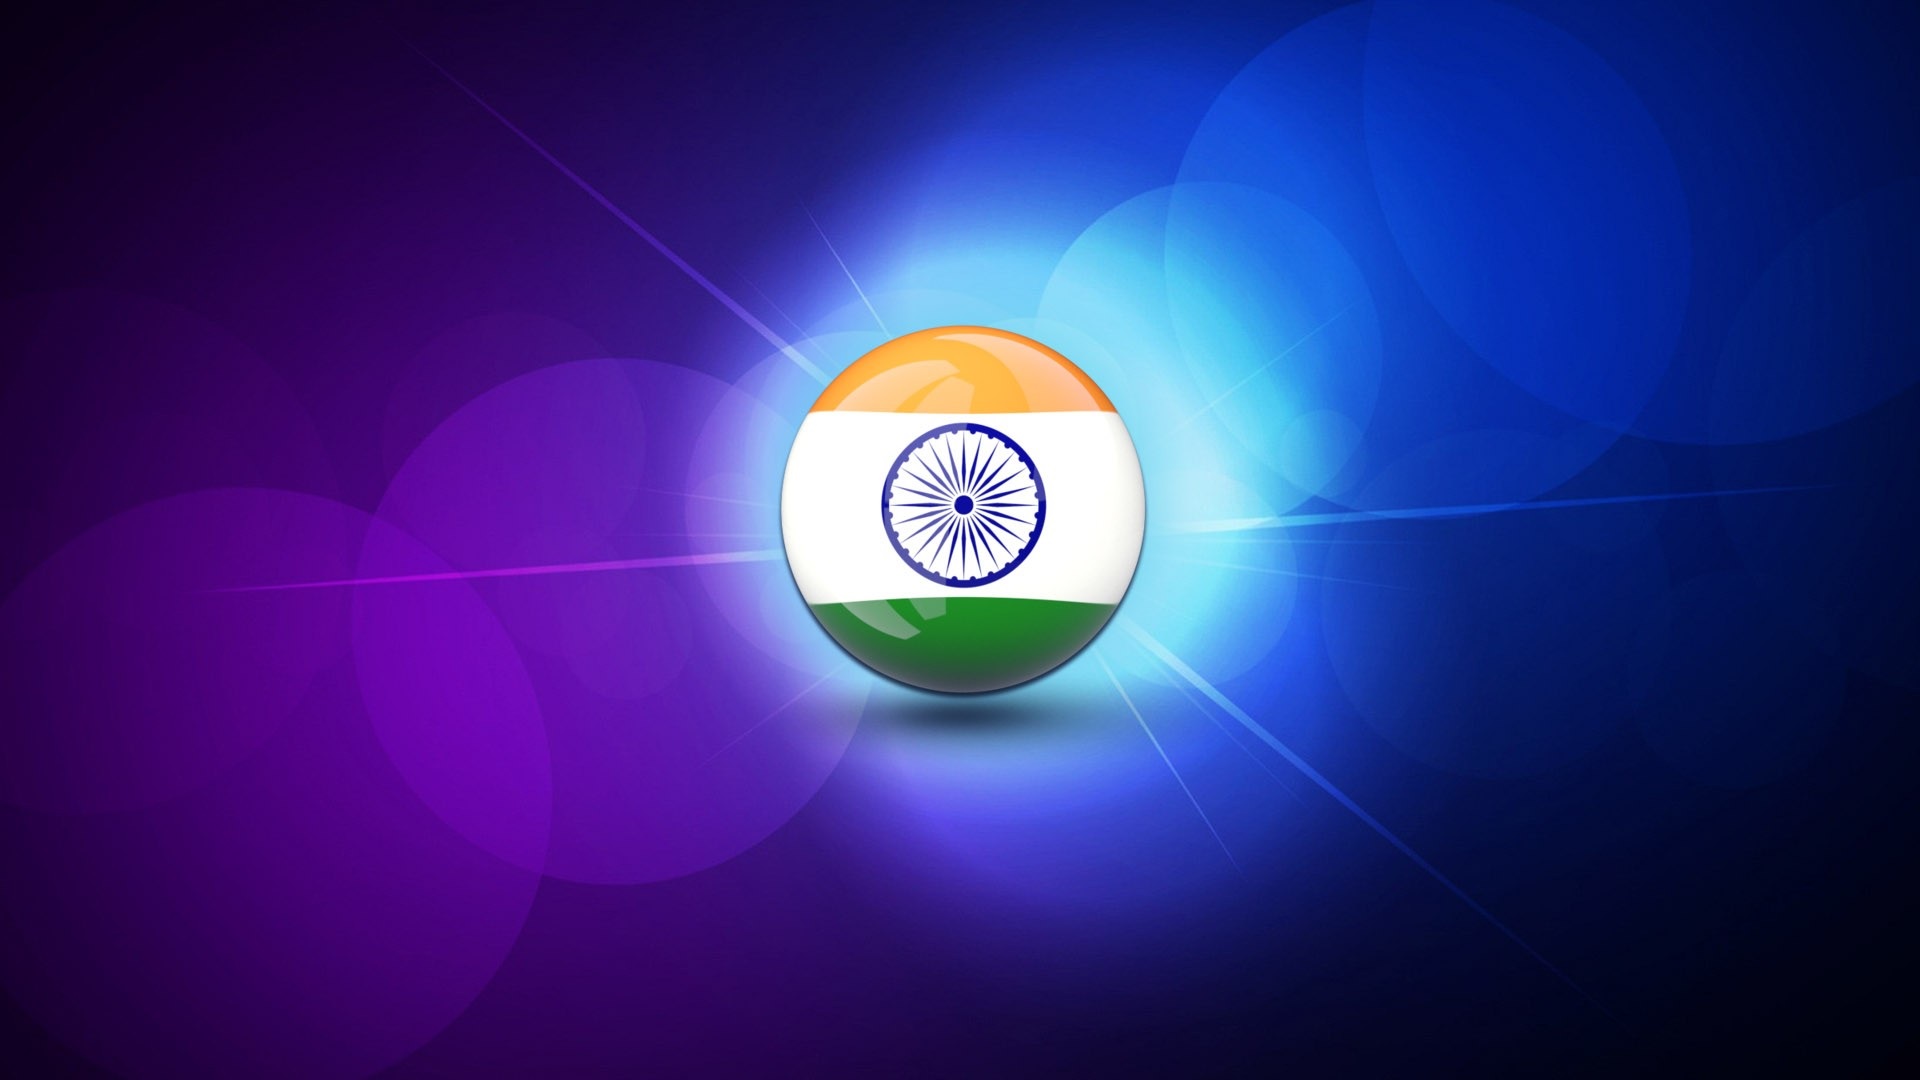 Background Indian Flag Hd - 1920x1080 Wallpaper 